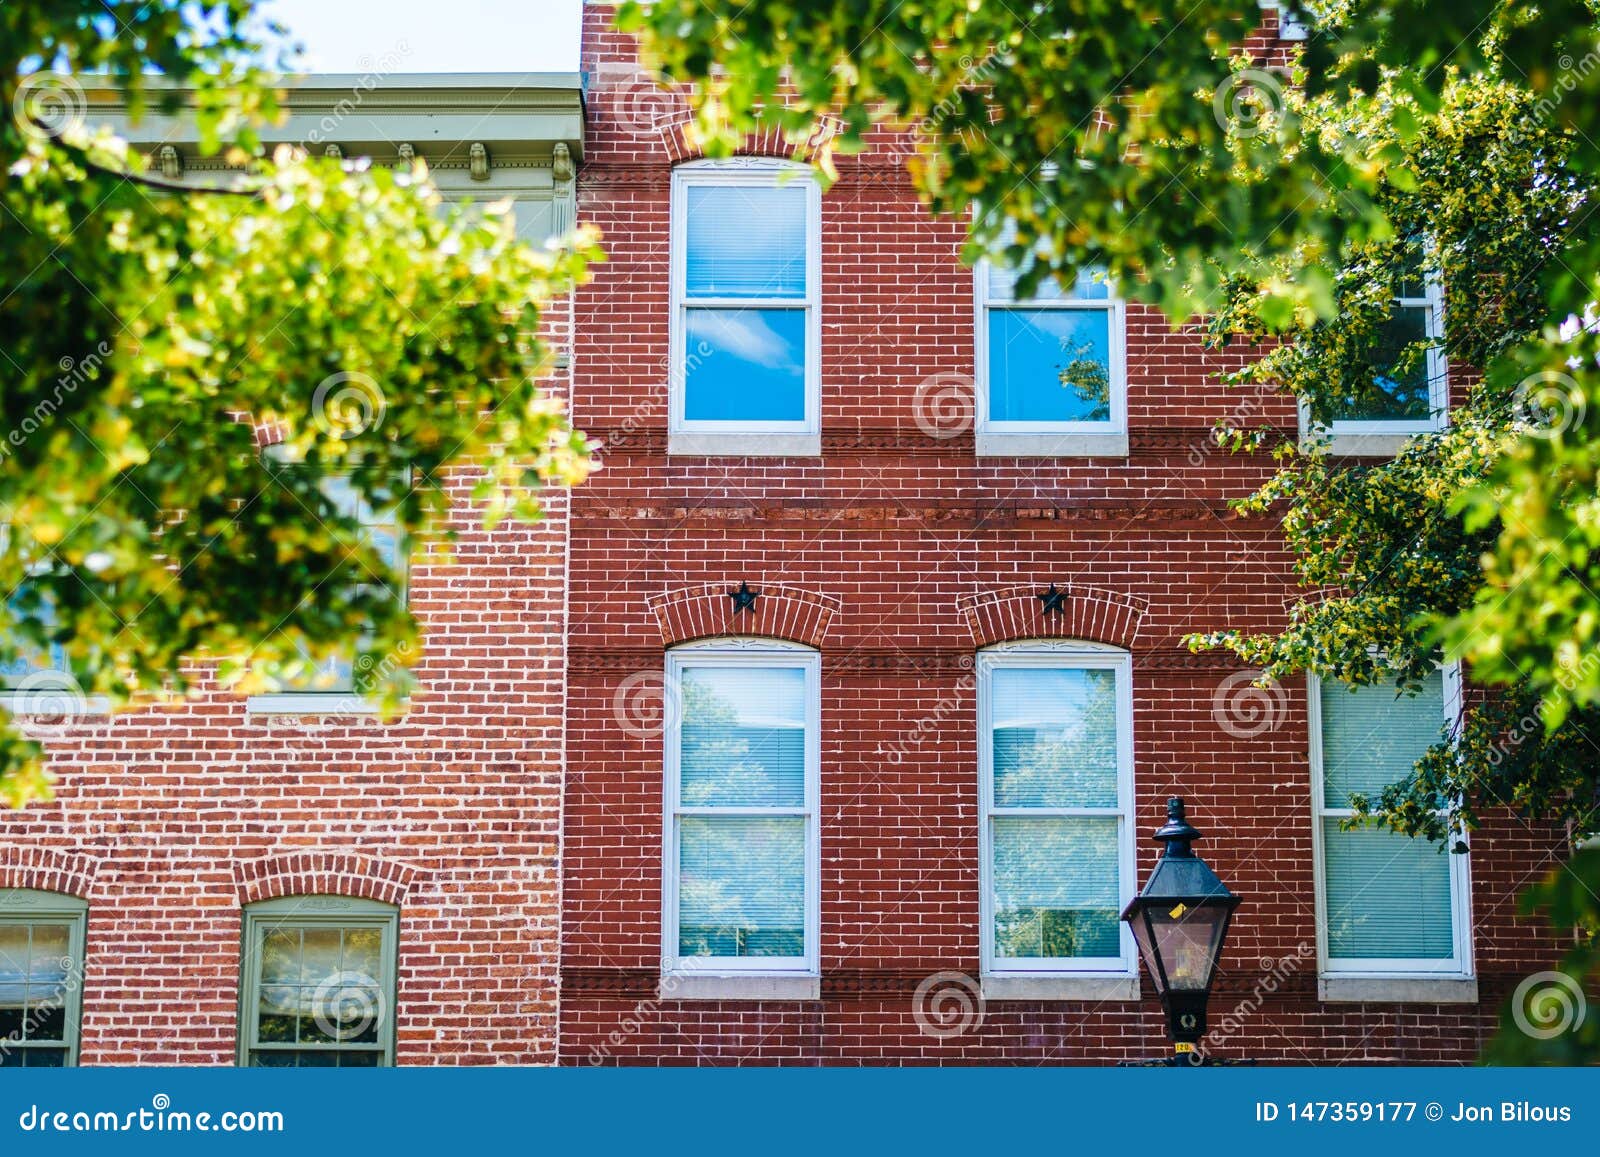 brick rowhouses on bond street in fells point, baltimore, maryland